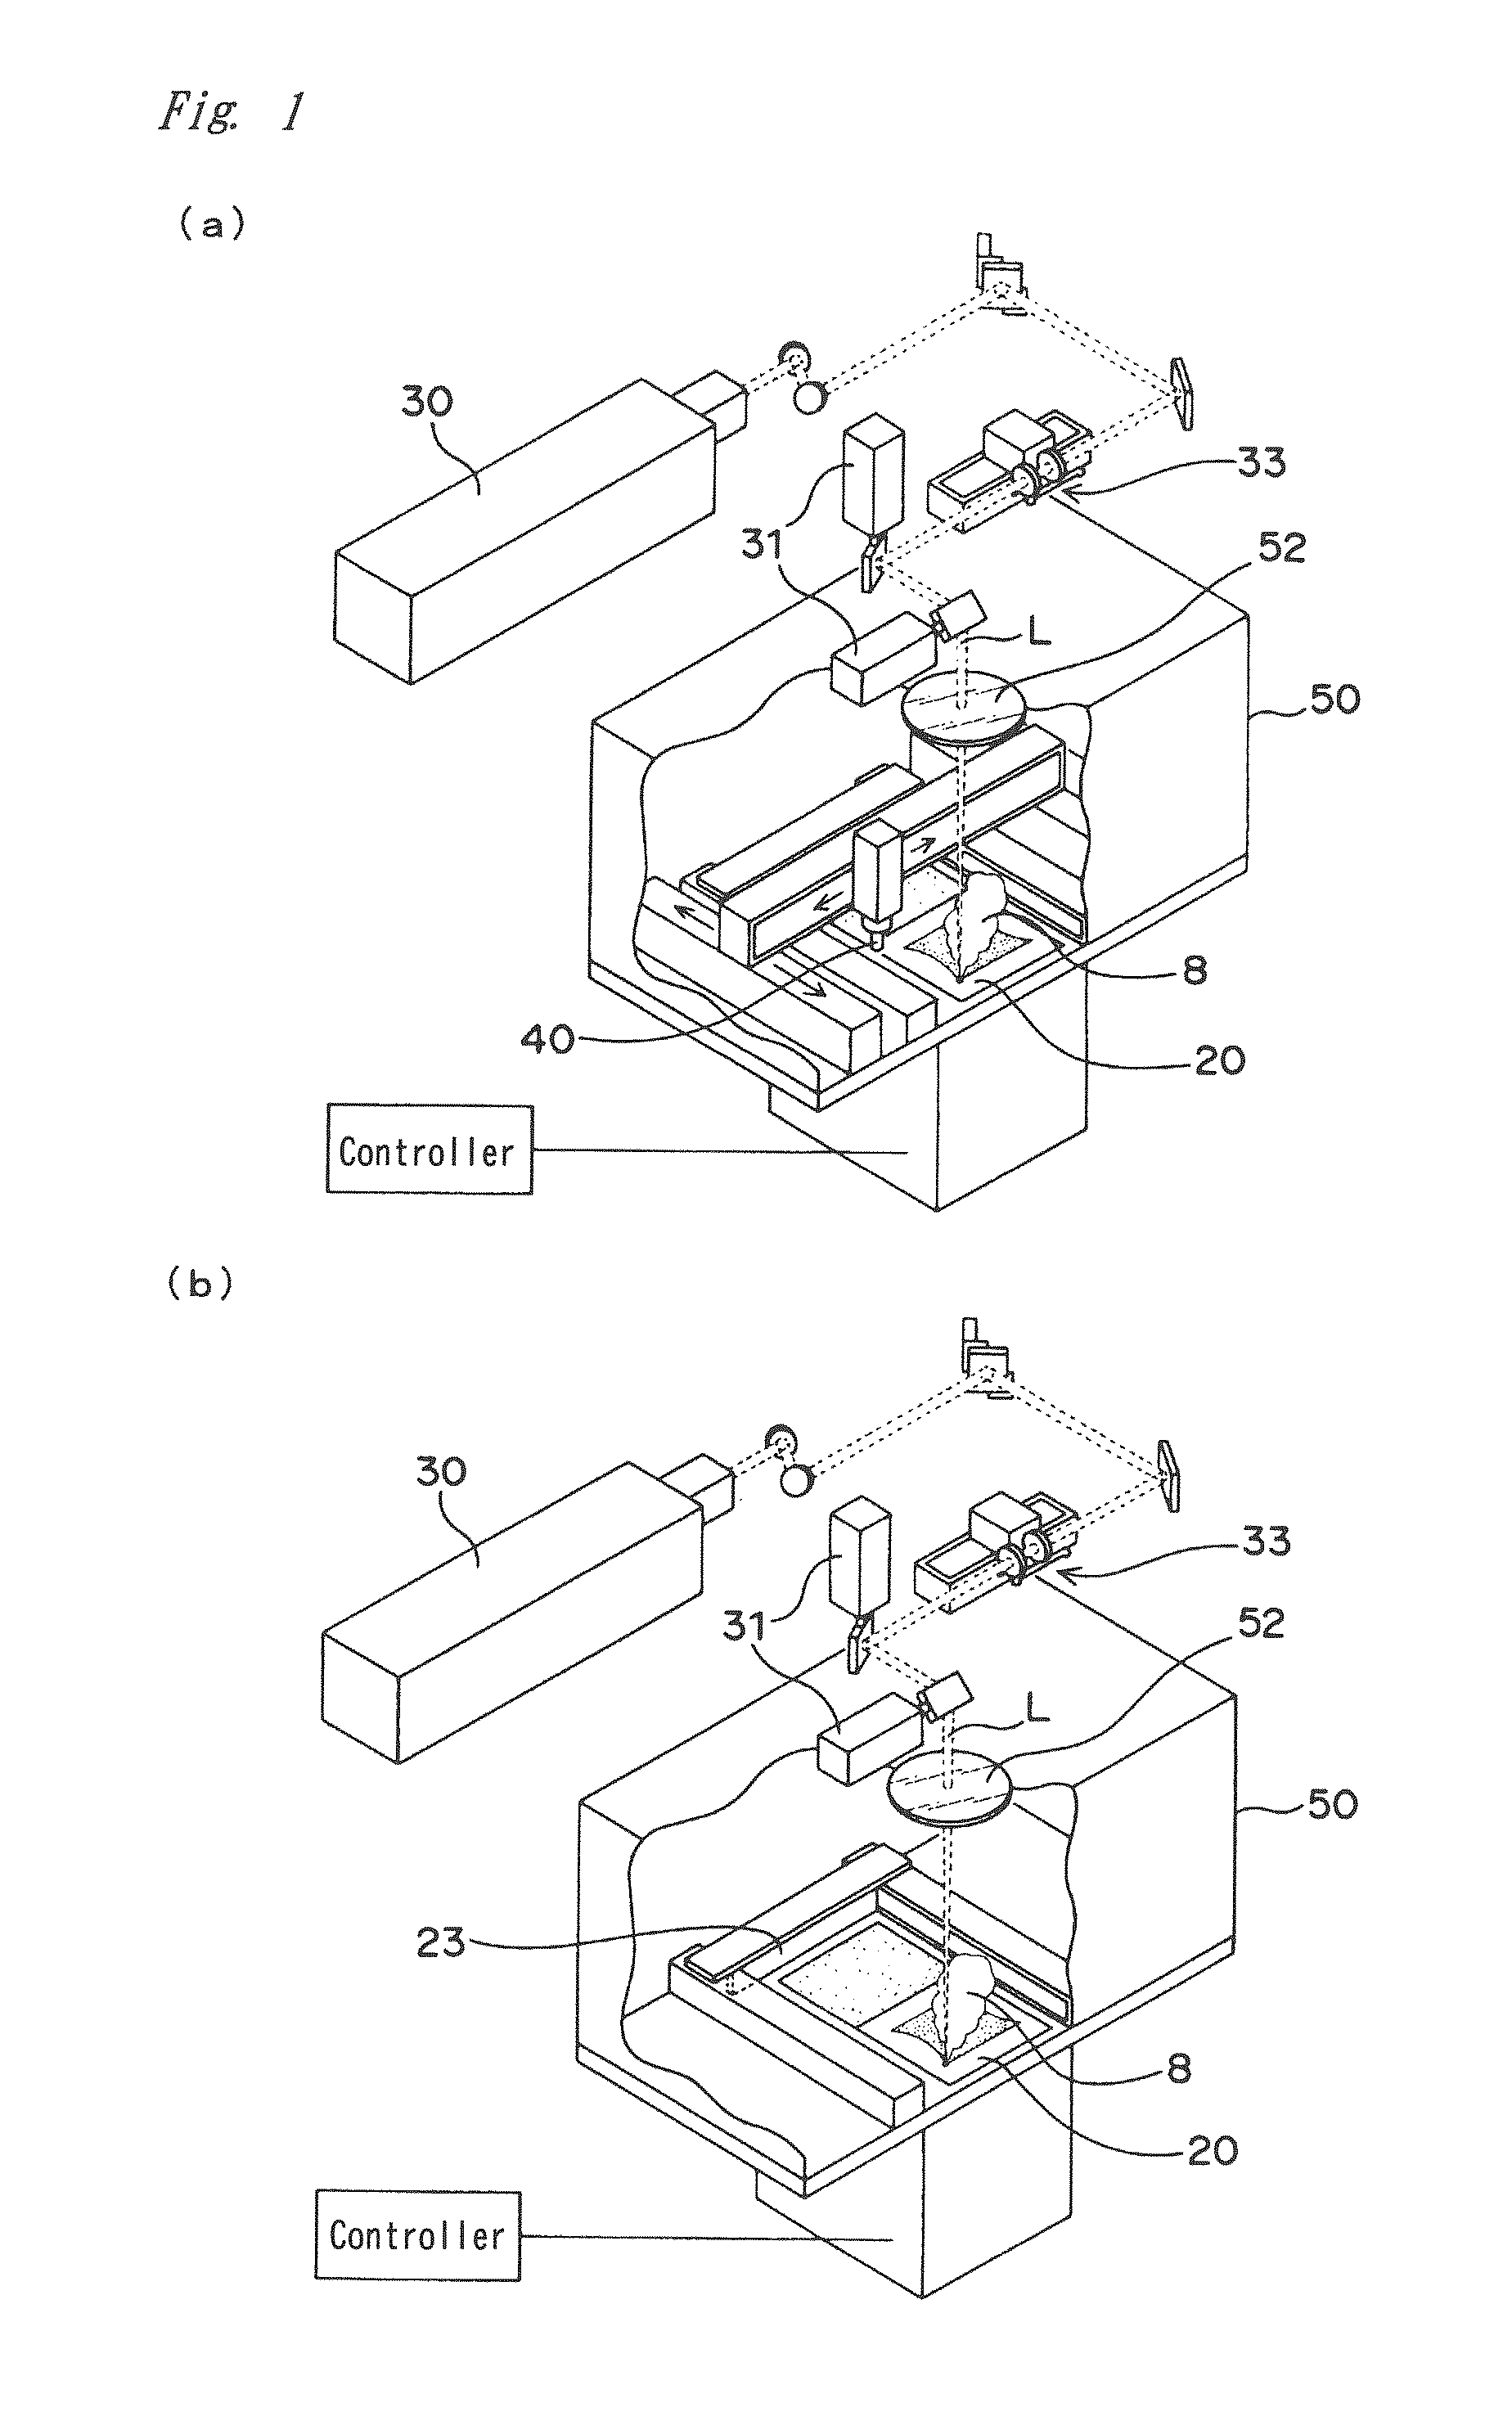 Metal powder for selective laser sintering, method for manufacturing three-dimensional shaped object by using the same, and three-dimensional shaped object obtained therefrom